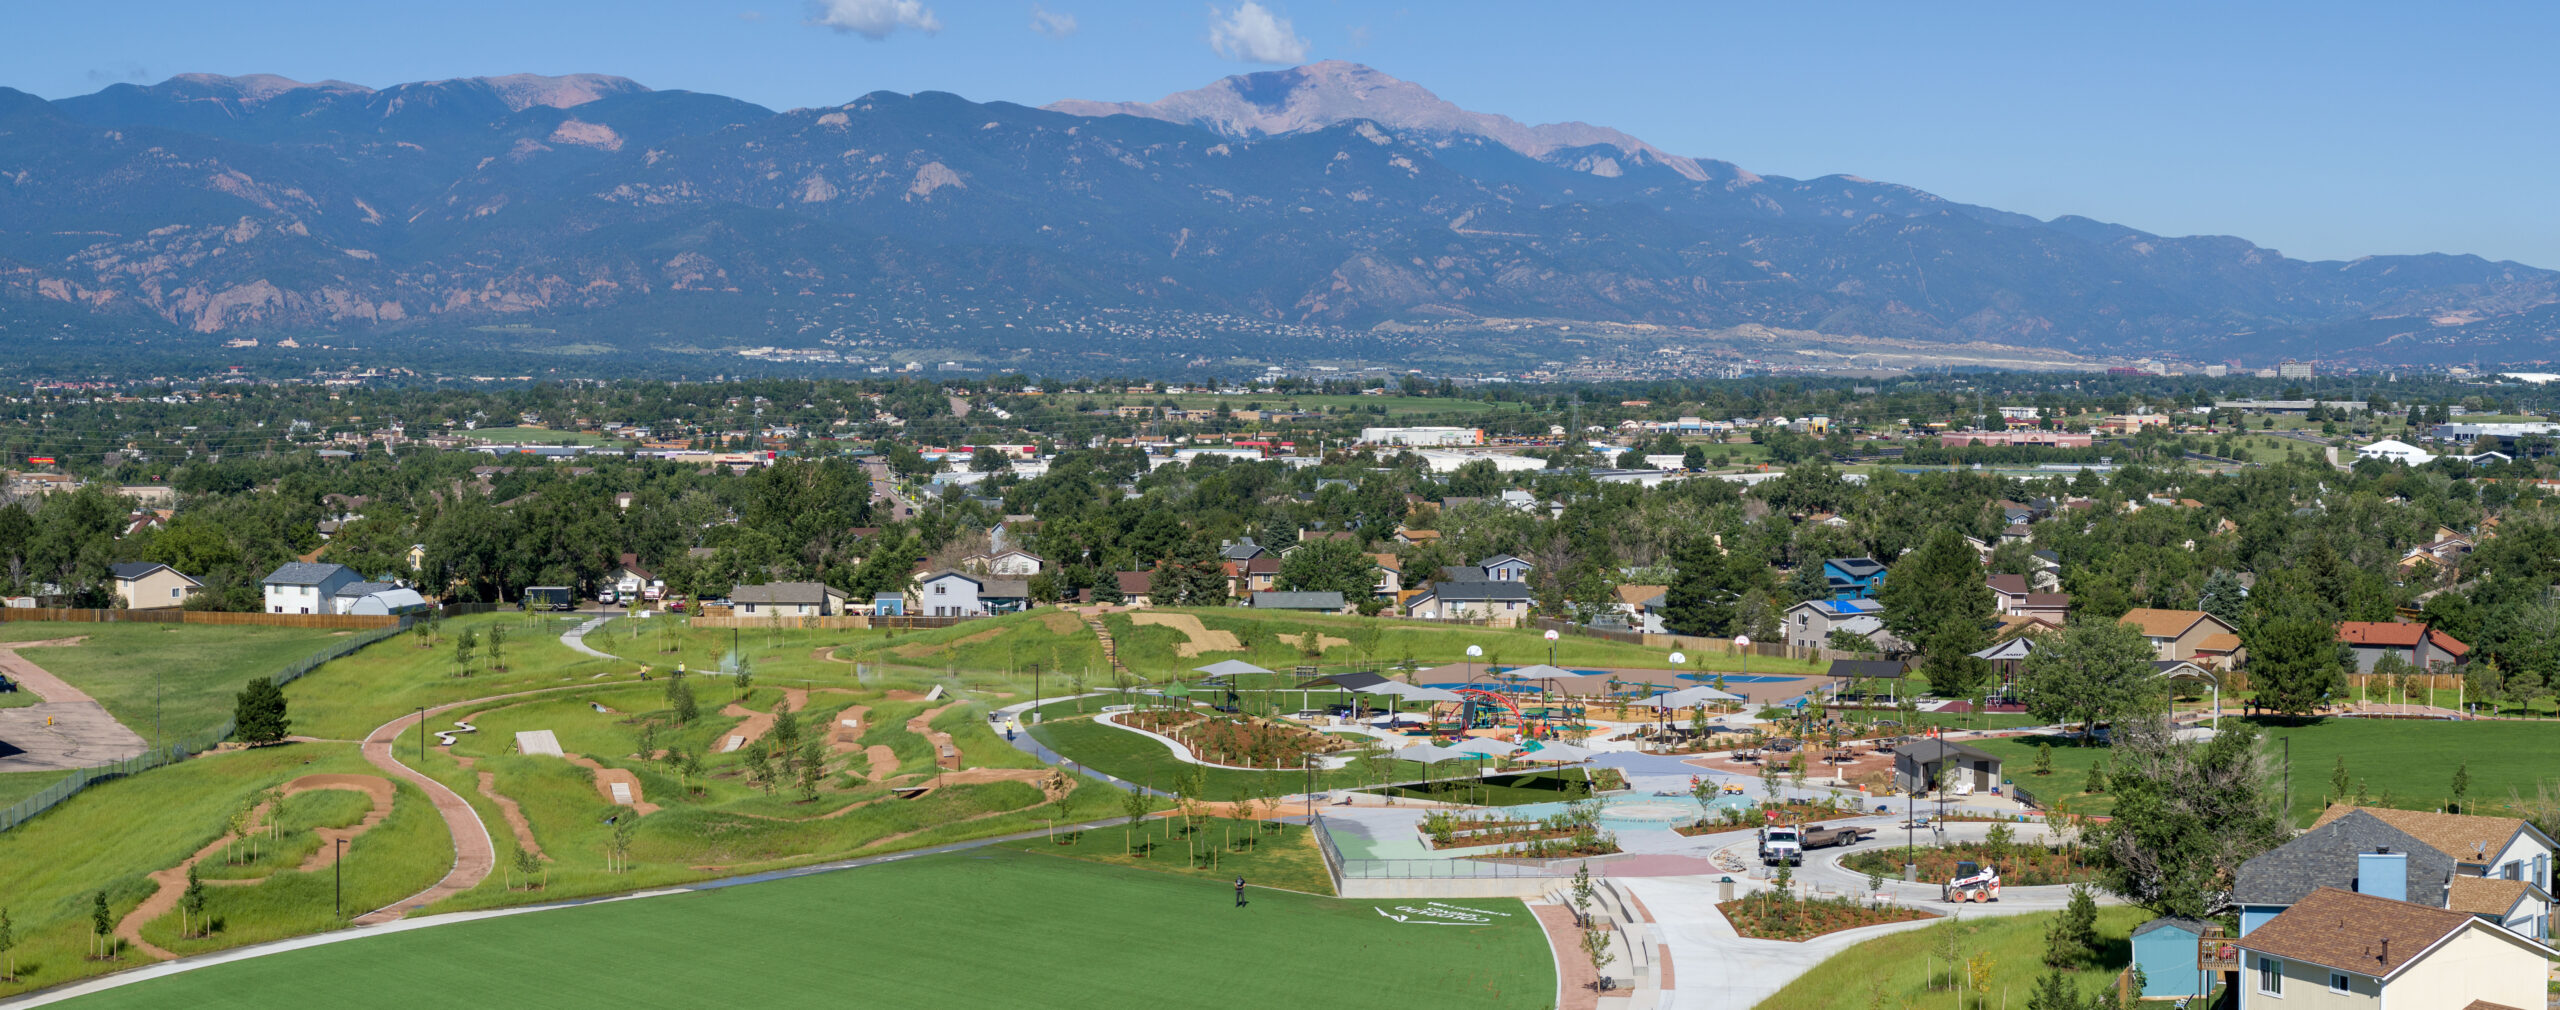 An aerial view of a park with mountains in the background.